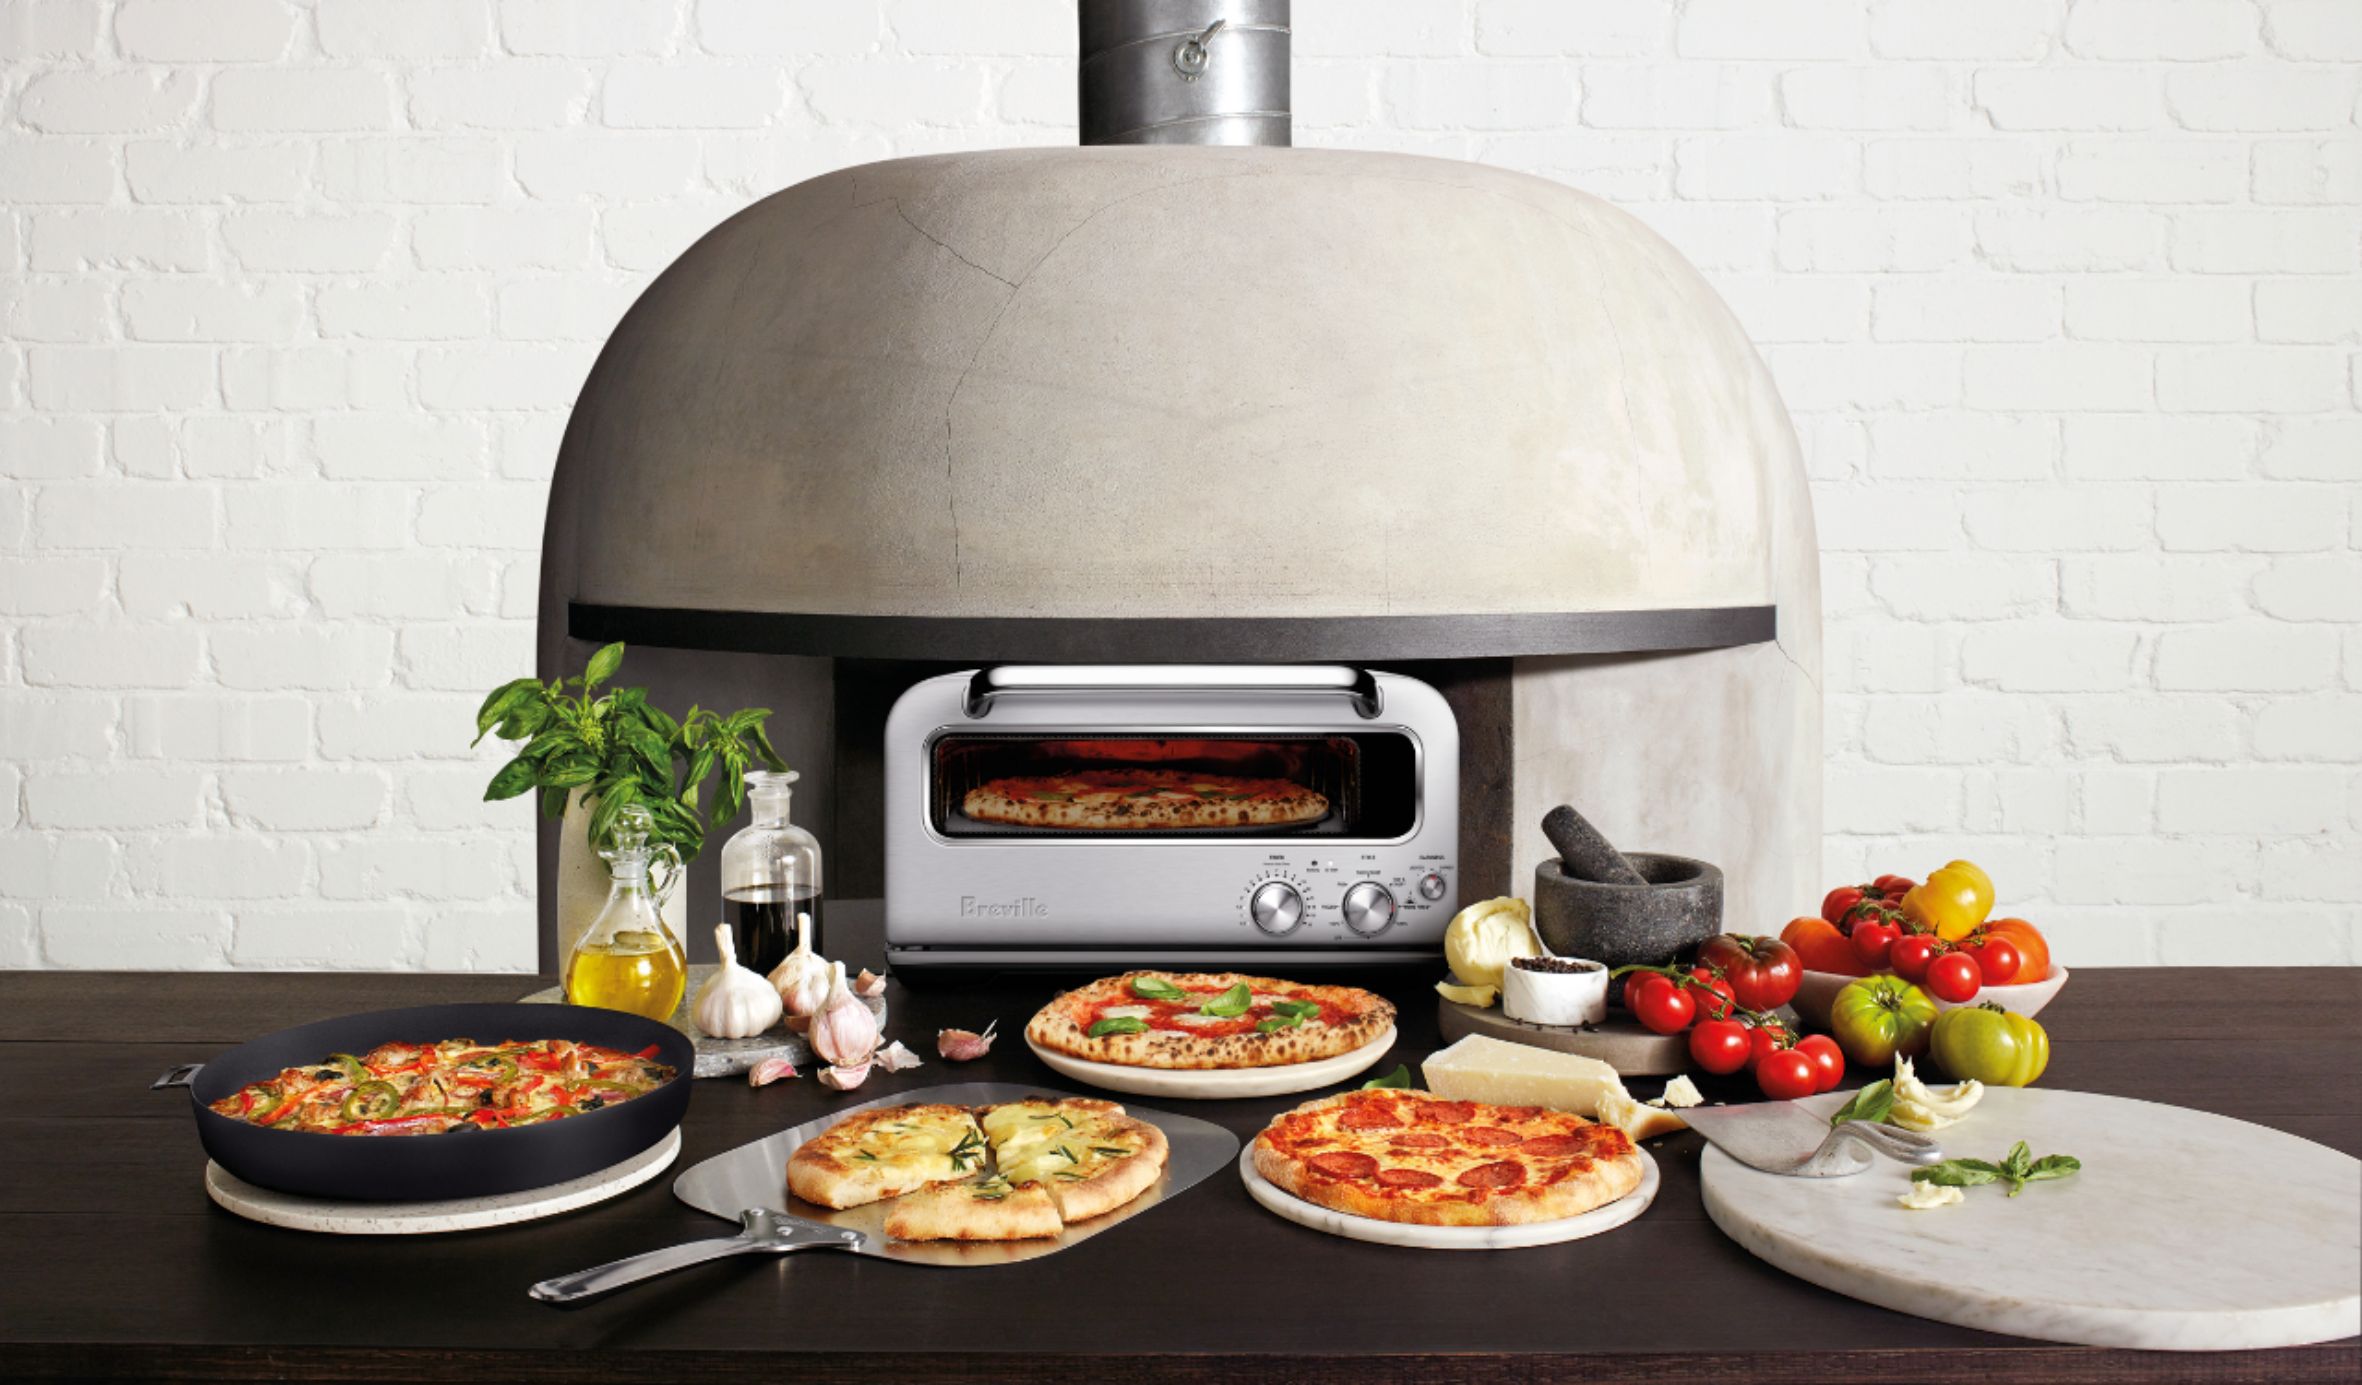 Breville Smart Oven® 9 Functions Brushed Stainless Steel Toaster/Pizza Oven